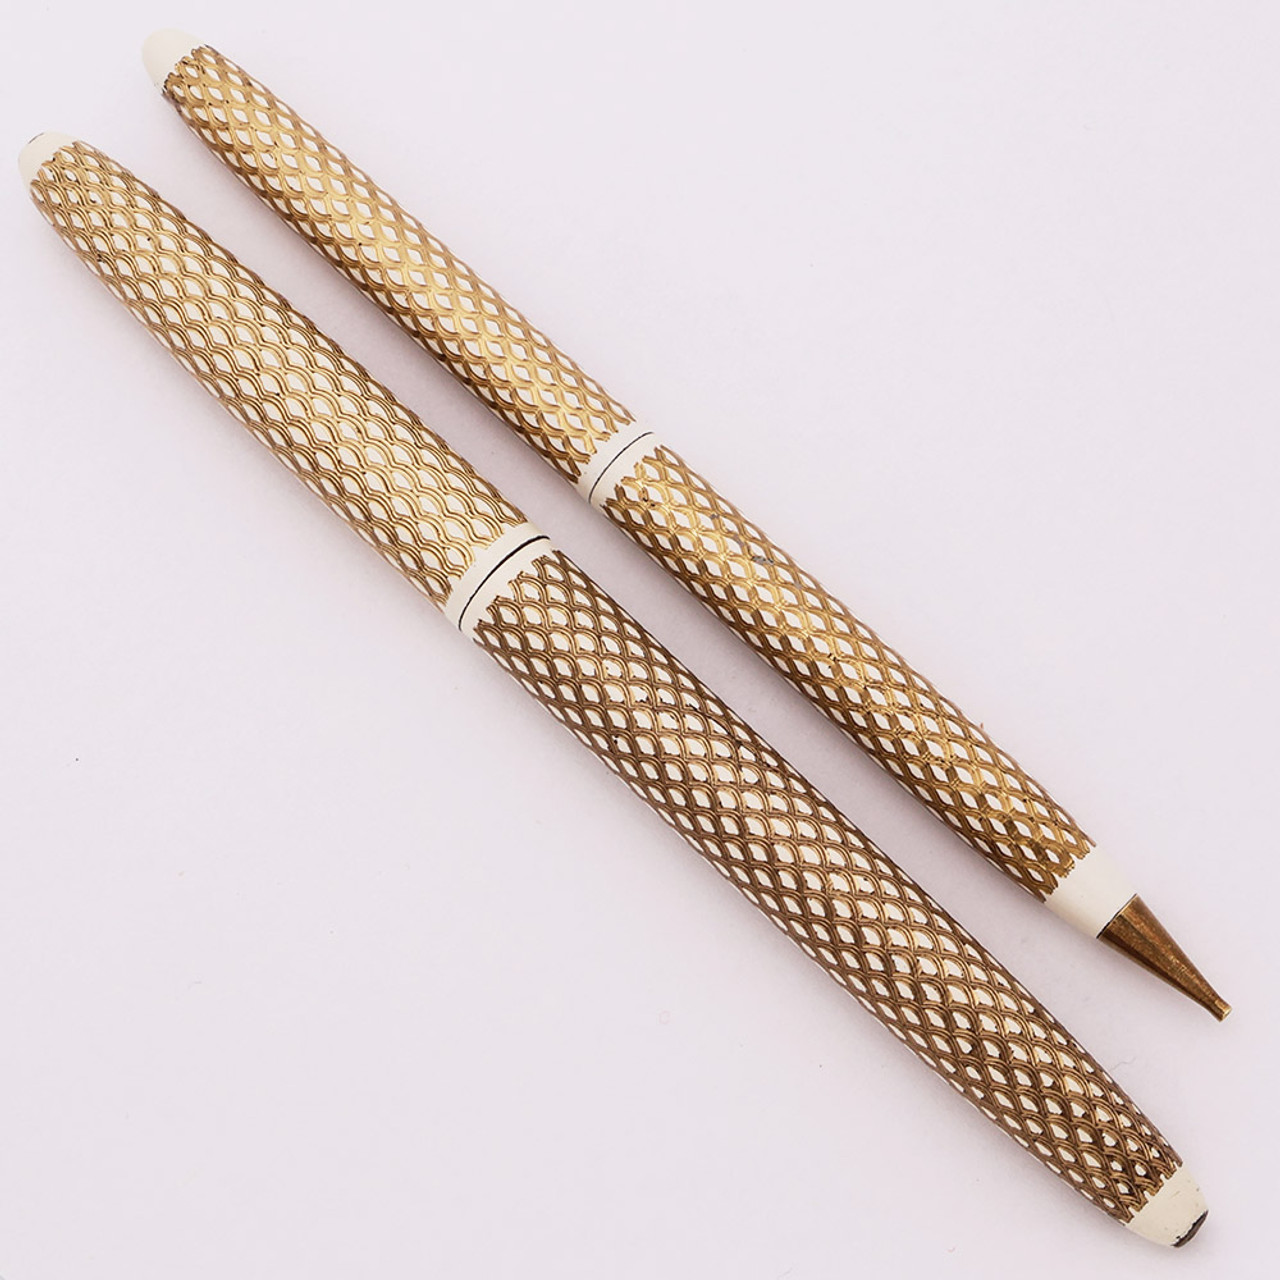 Lady Sheaffer V Skripsert  Fountain Pen and Pencil Set (1960s) - White Paisley, Cartridges Only, Fine Triumph Nib (Excellent, Work Well)